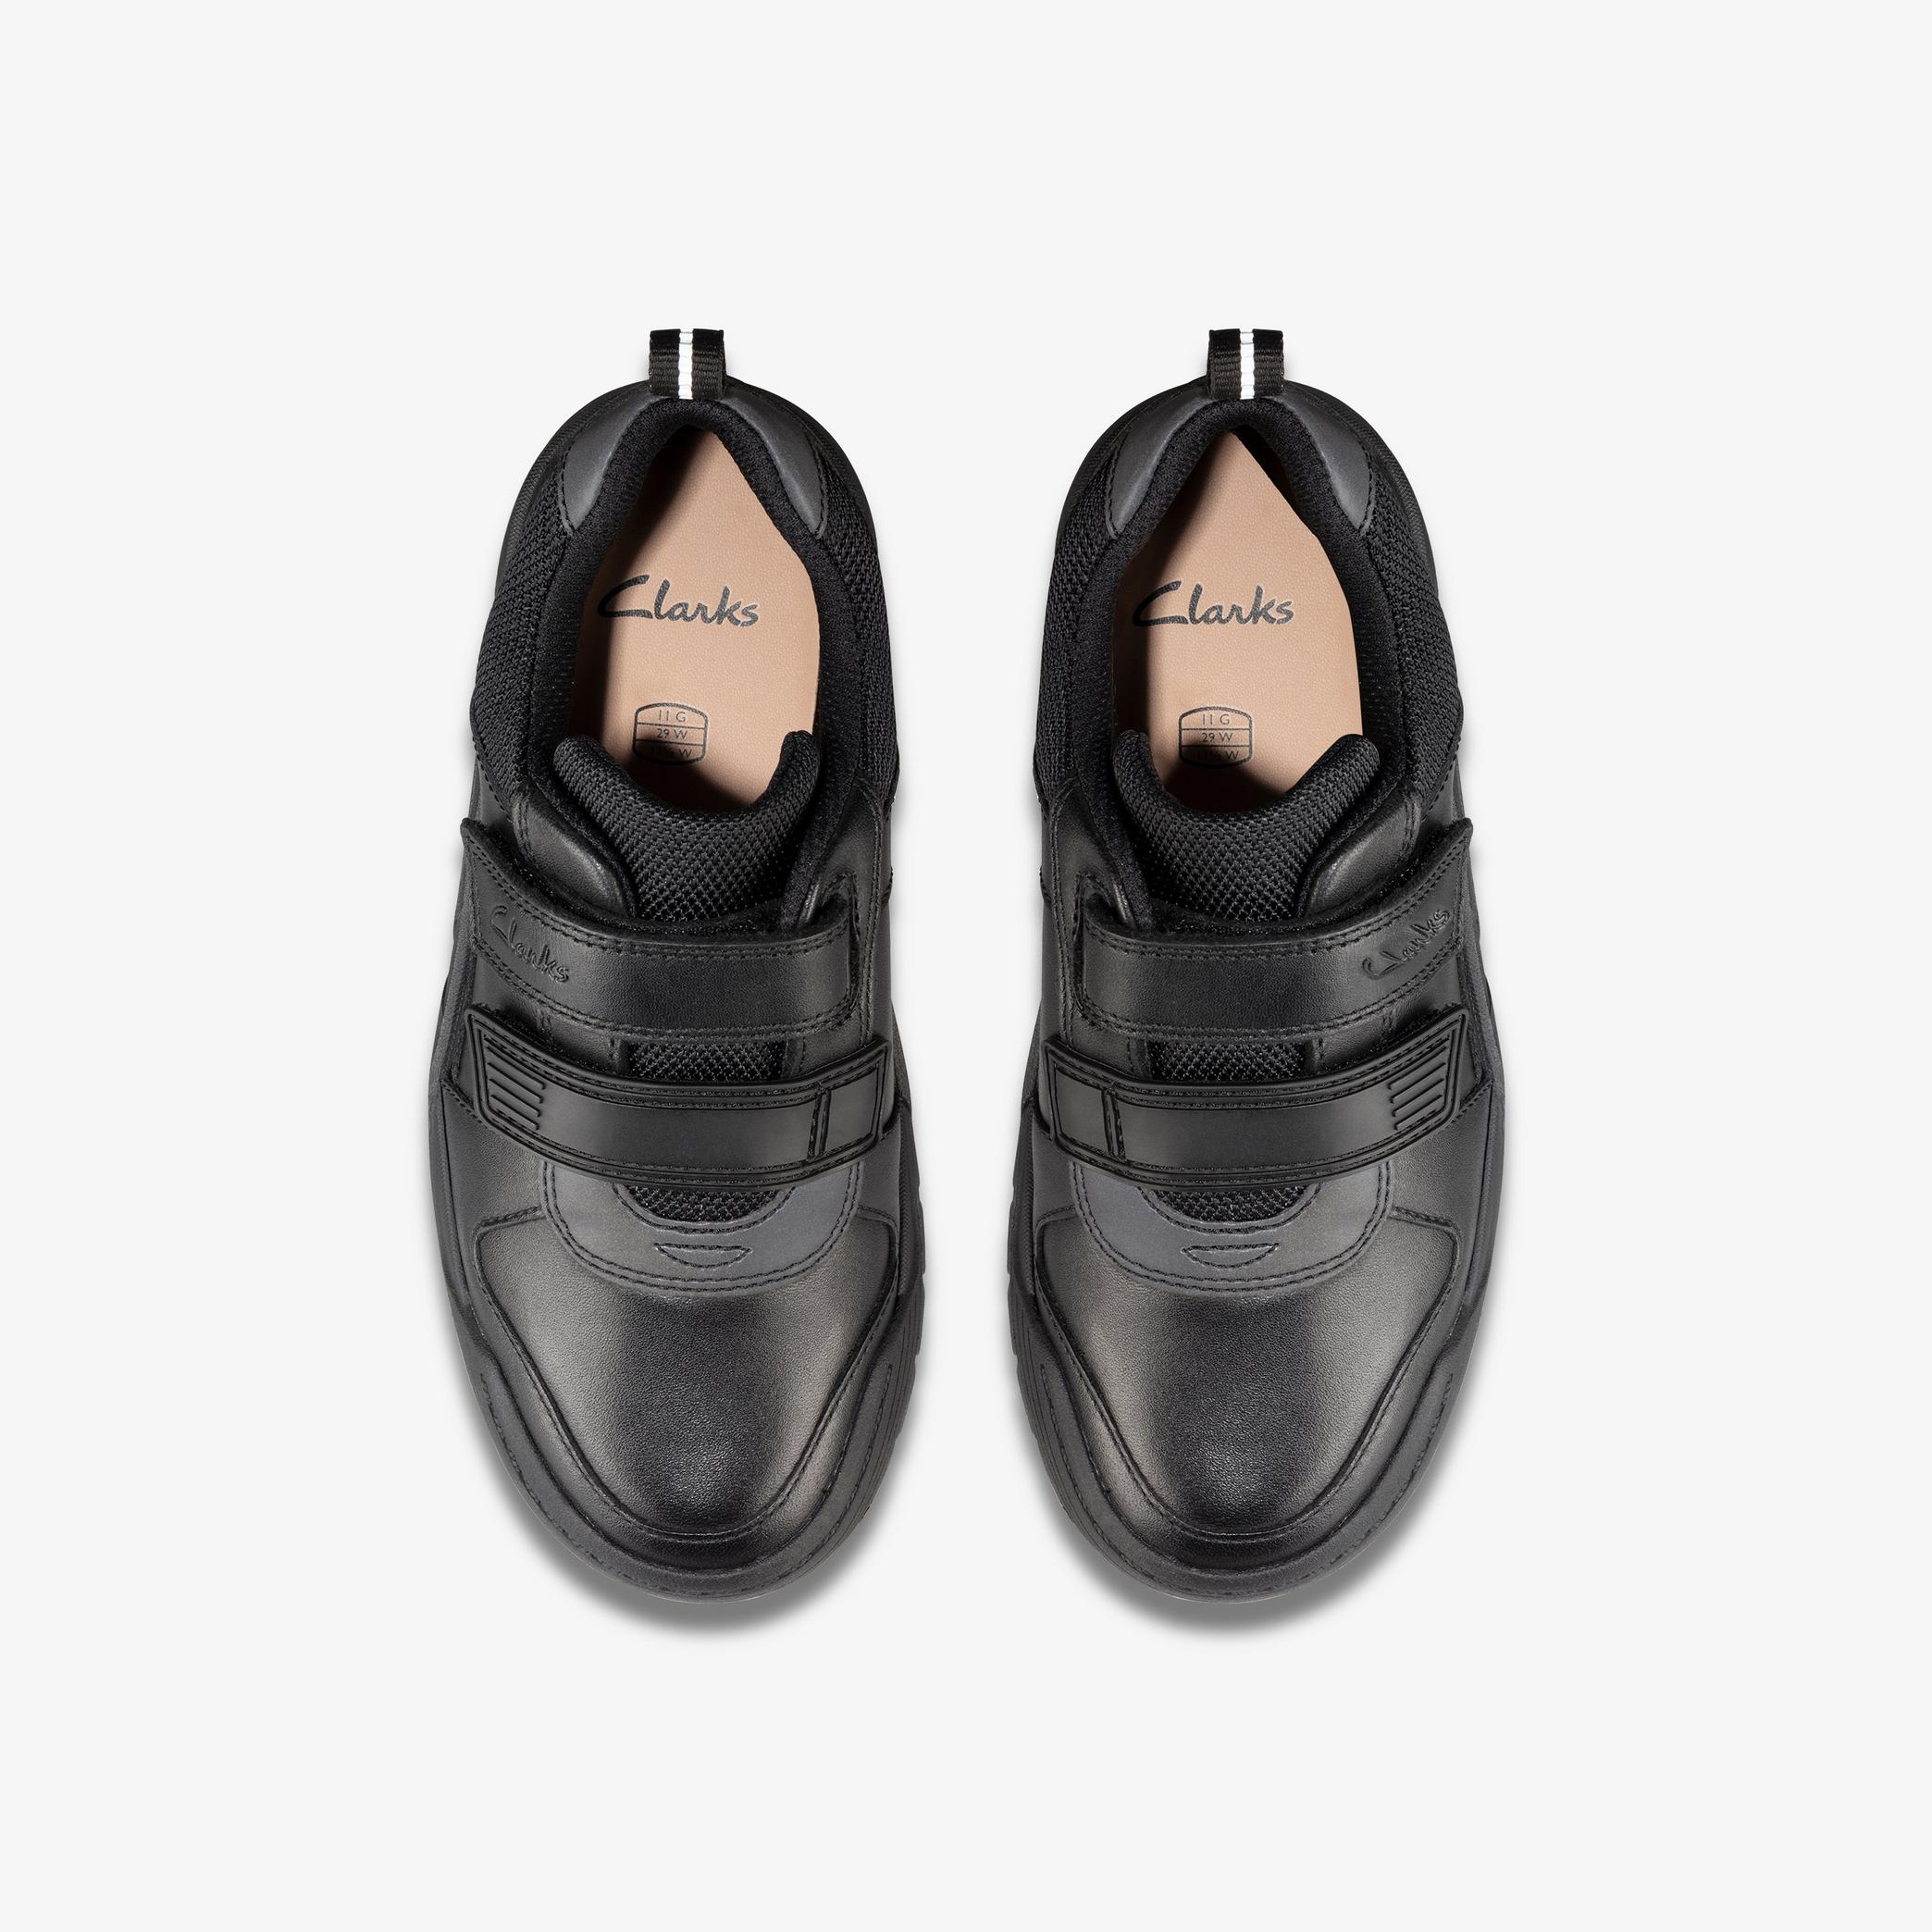 Boys Scooter Speed Kid Black Leather Shoes | Clarks UK